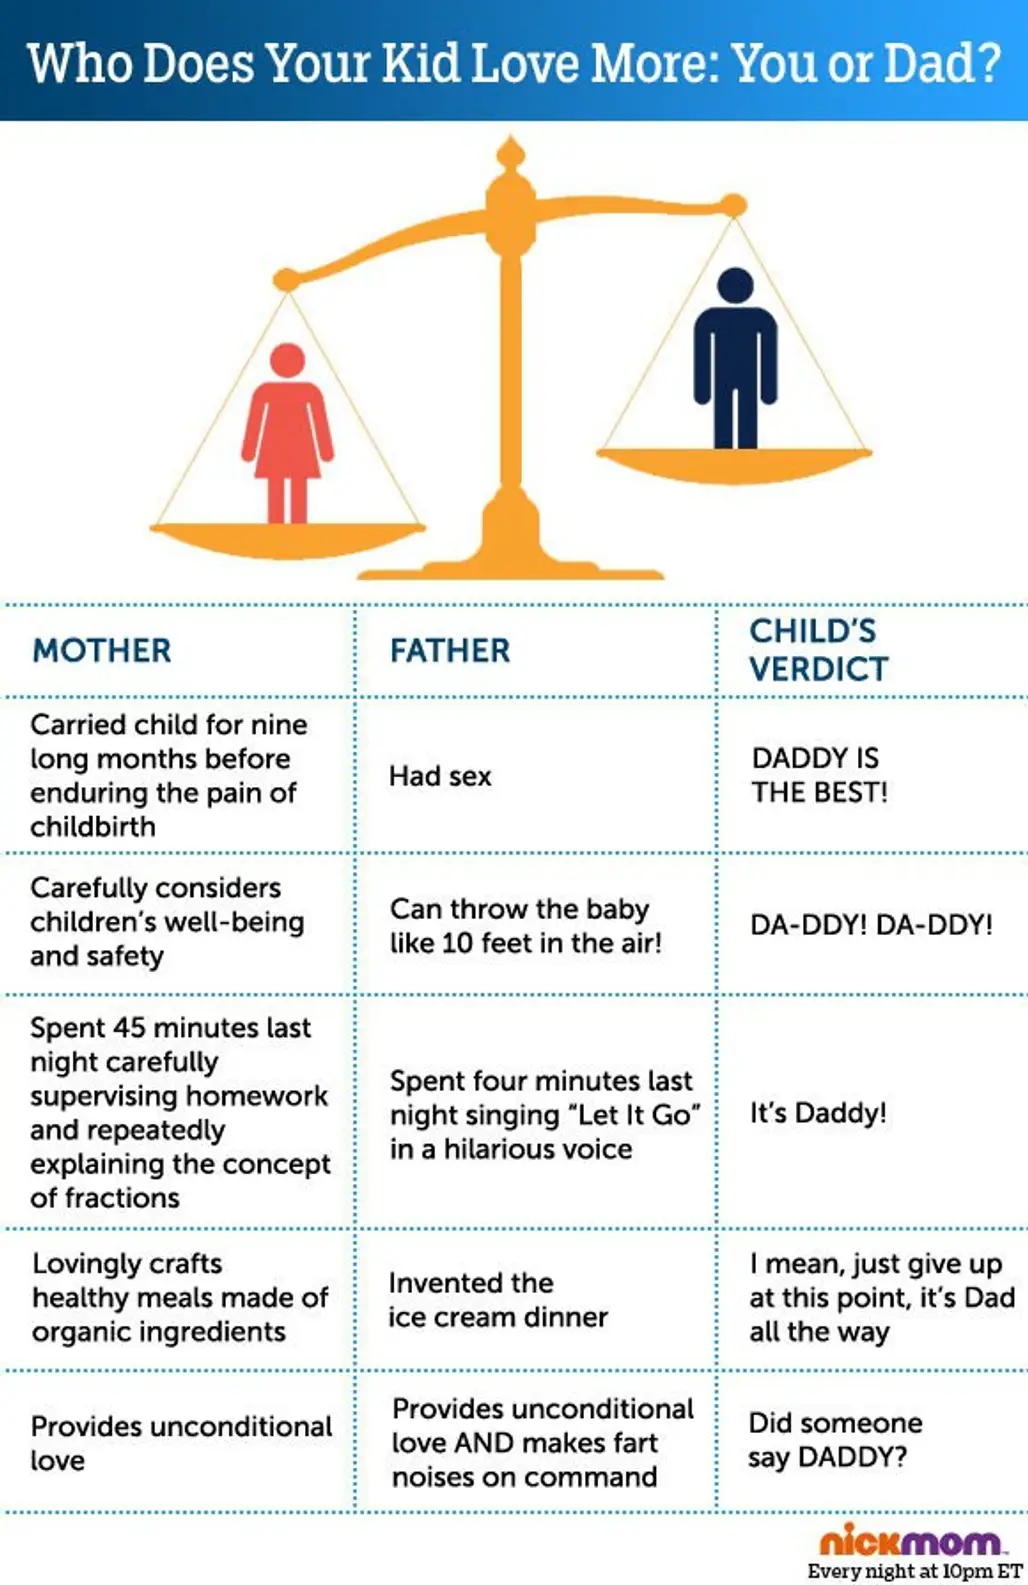 Mom V Dad - the Important Stuff